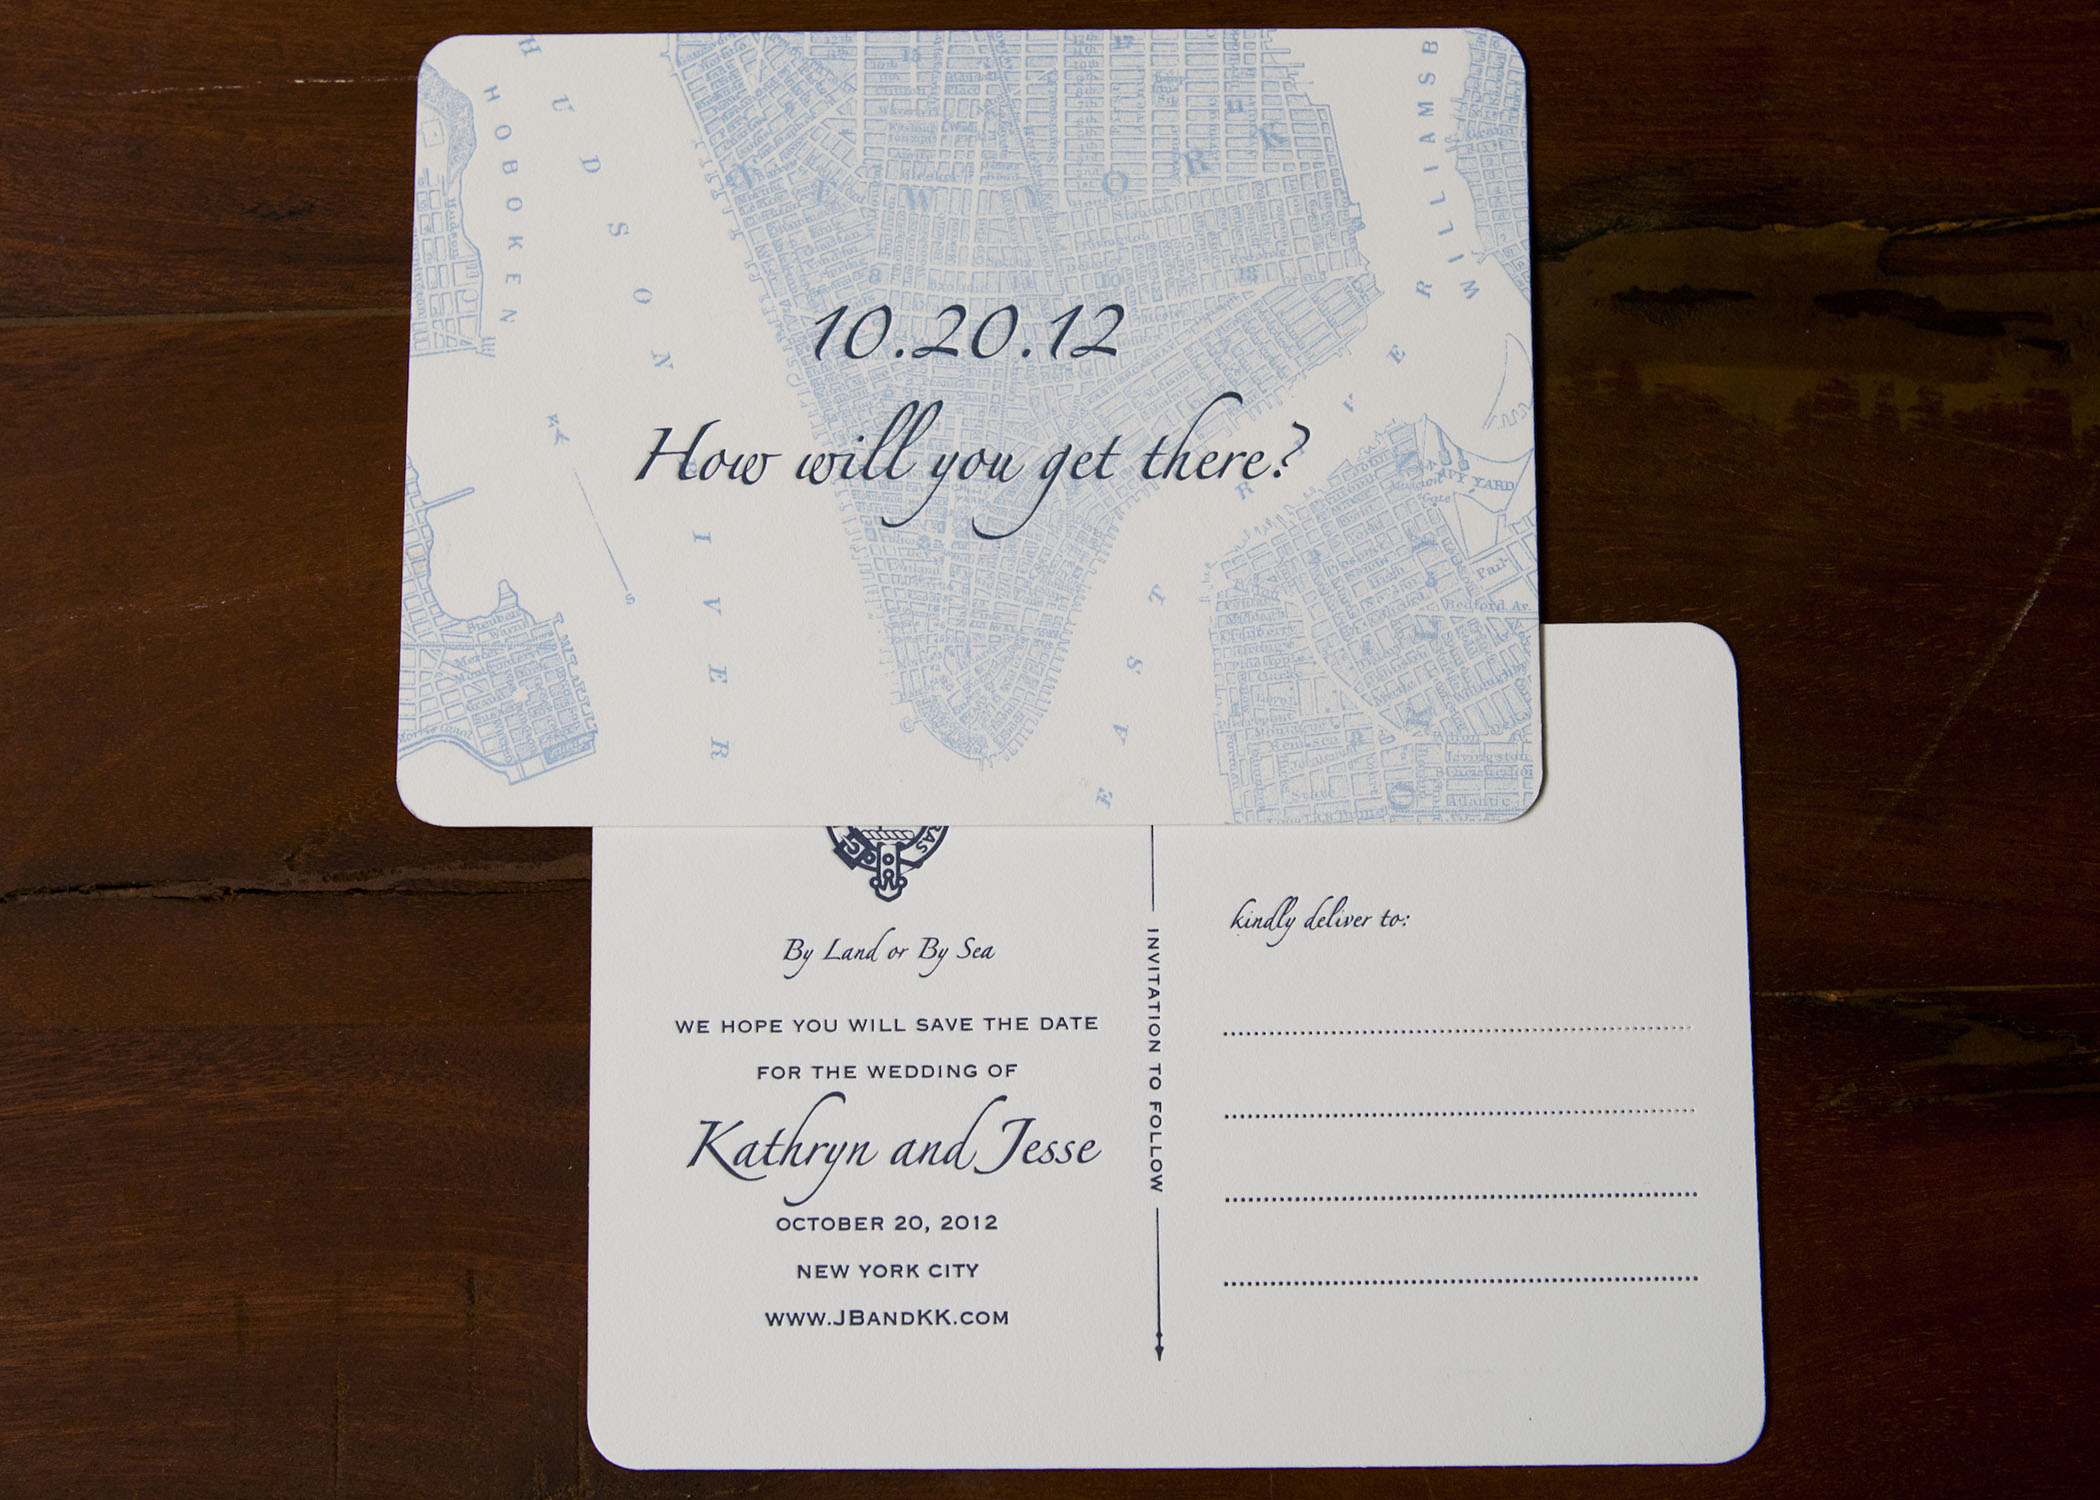 wedding-invitations-adoring-save-the-date-cards-lovable-invites-newlywed-free-save-the-date-cards-for-the-best-day-of-your-life-make-your-own-free-save-the-date-cards-print-cards-cheap